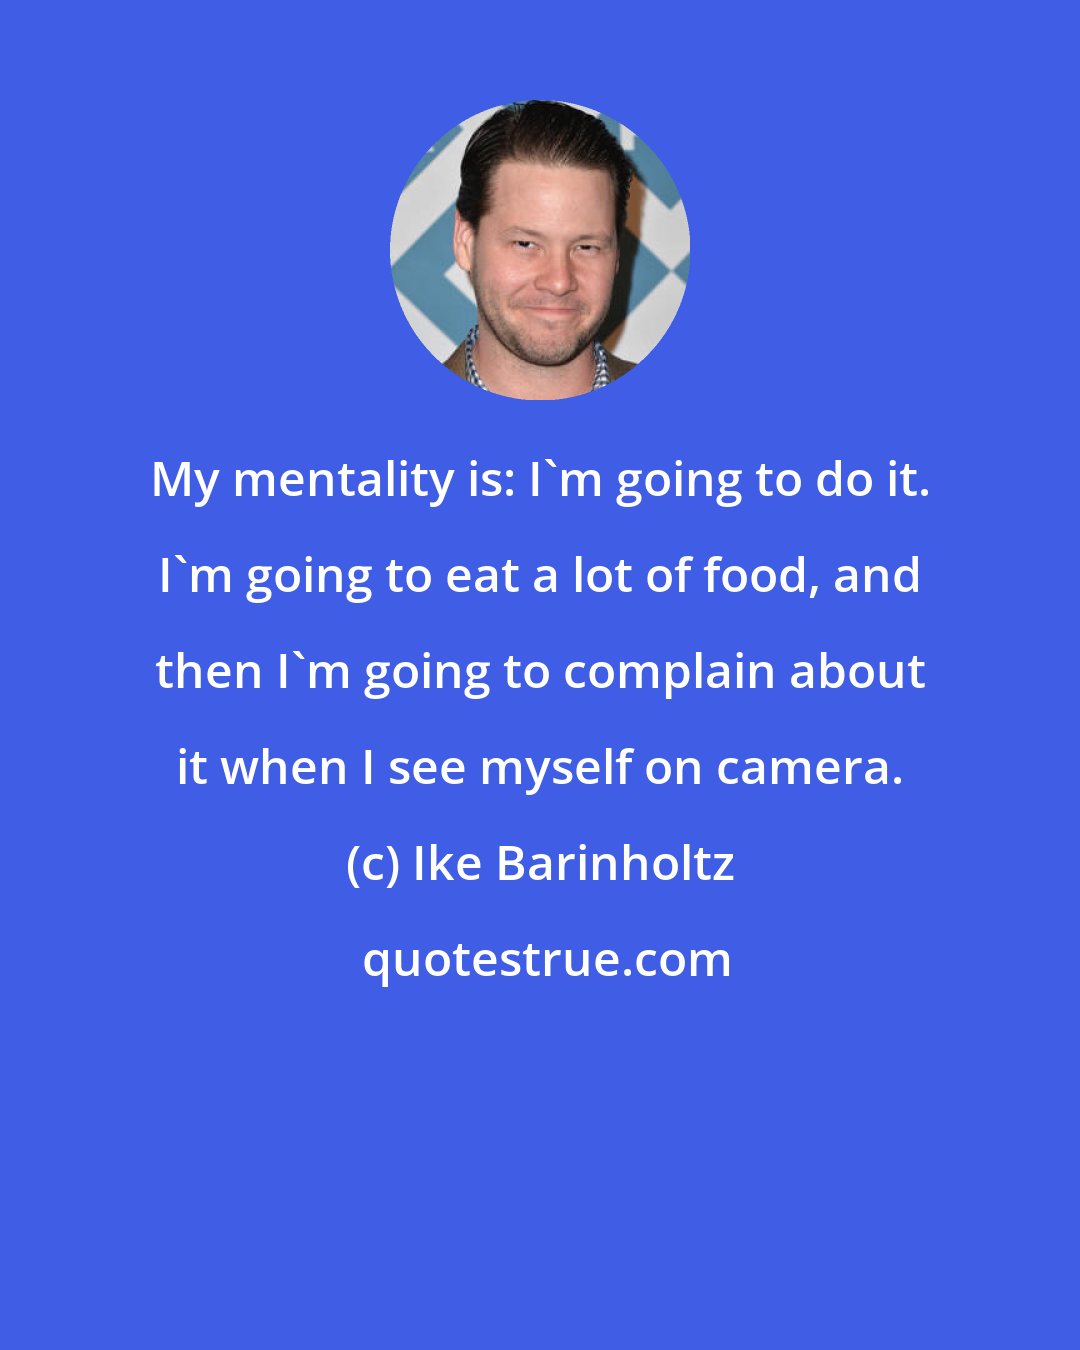 Ike Barinholtz: My mentality is: I'm going to do it. I'm going to eat a lot of food, and then I'm going to complain about it when I see myself on camera.